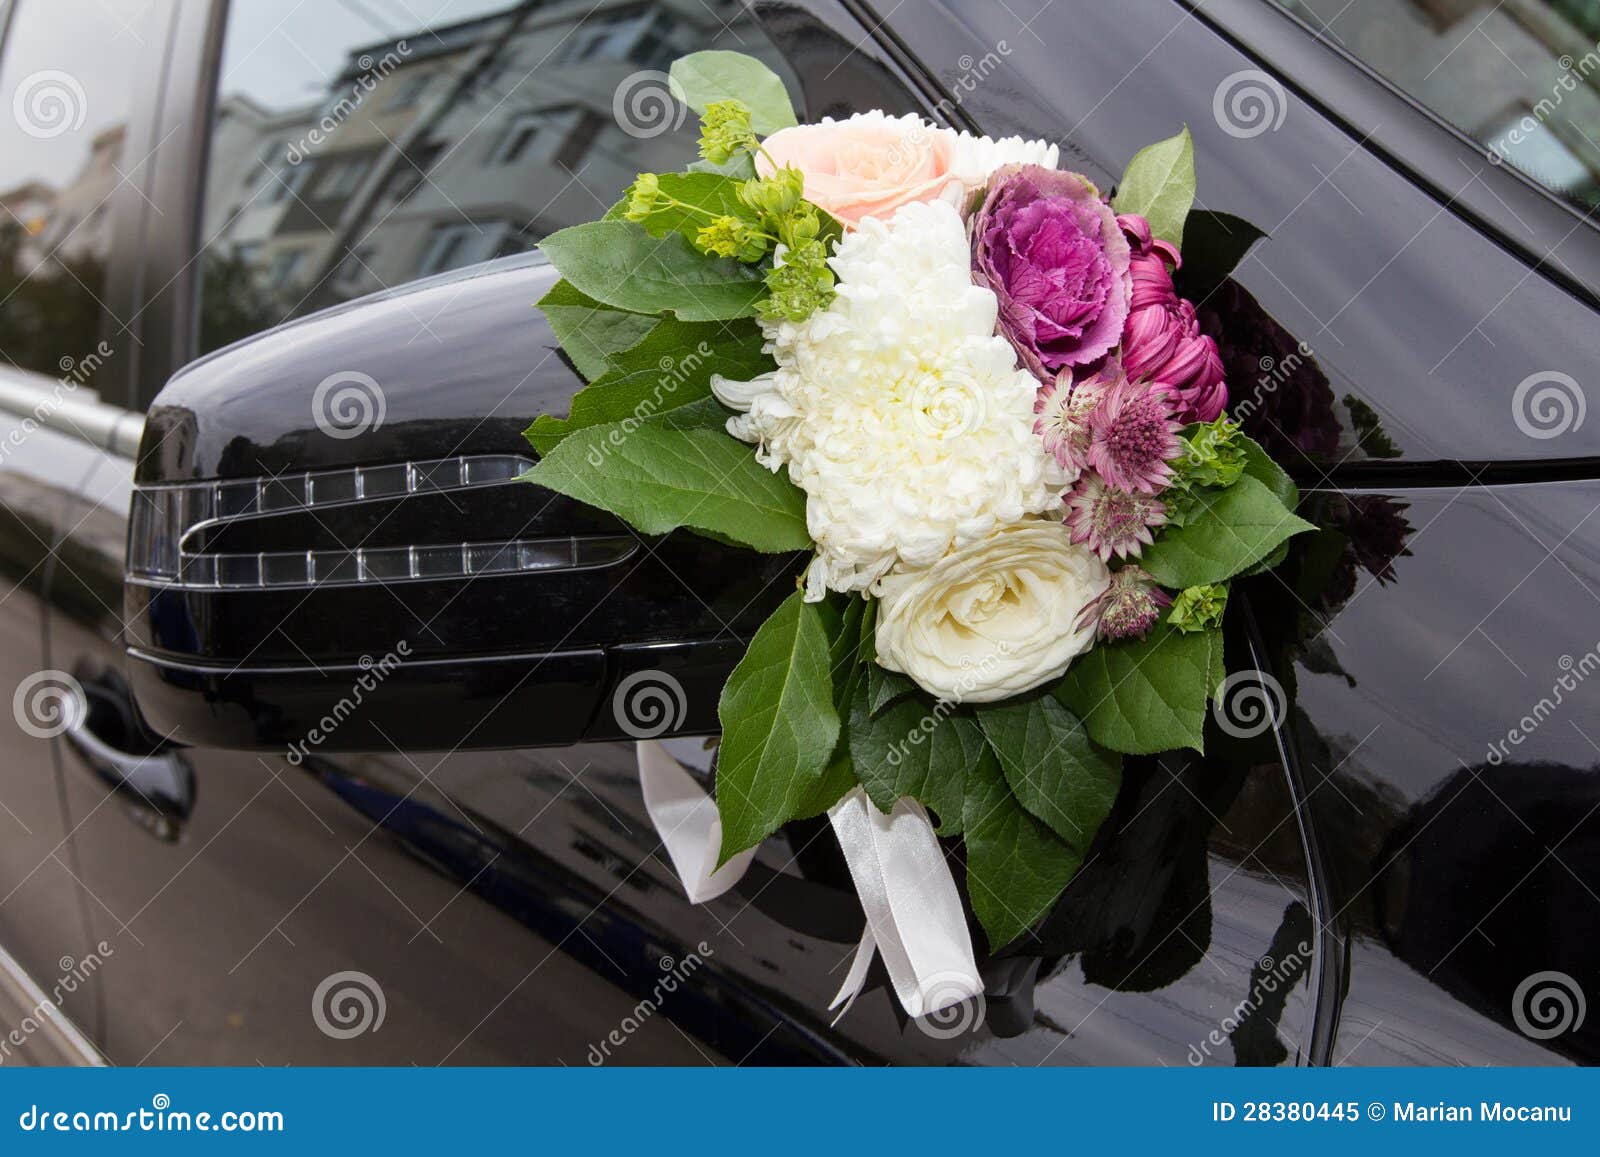 5,495 Wedding Car Decoration Stock Photos - Free & Royalty-Free Stock  Photos from Dreamstime